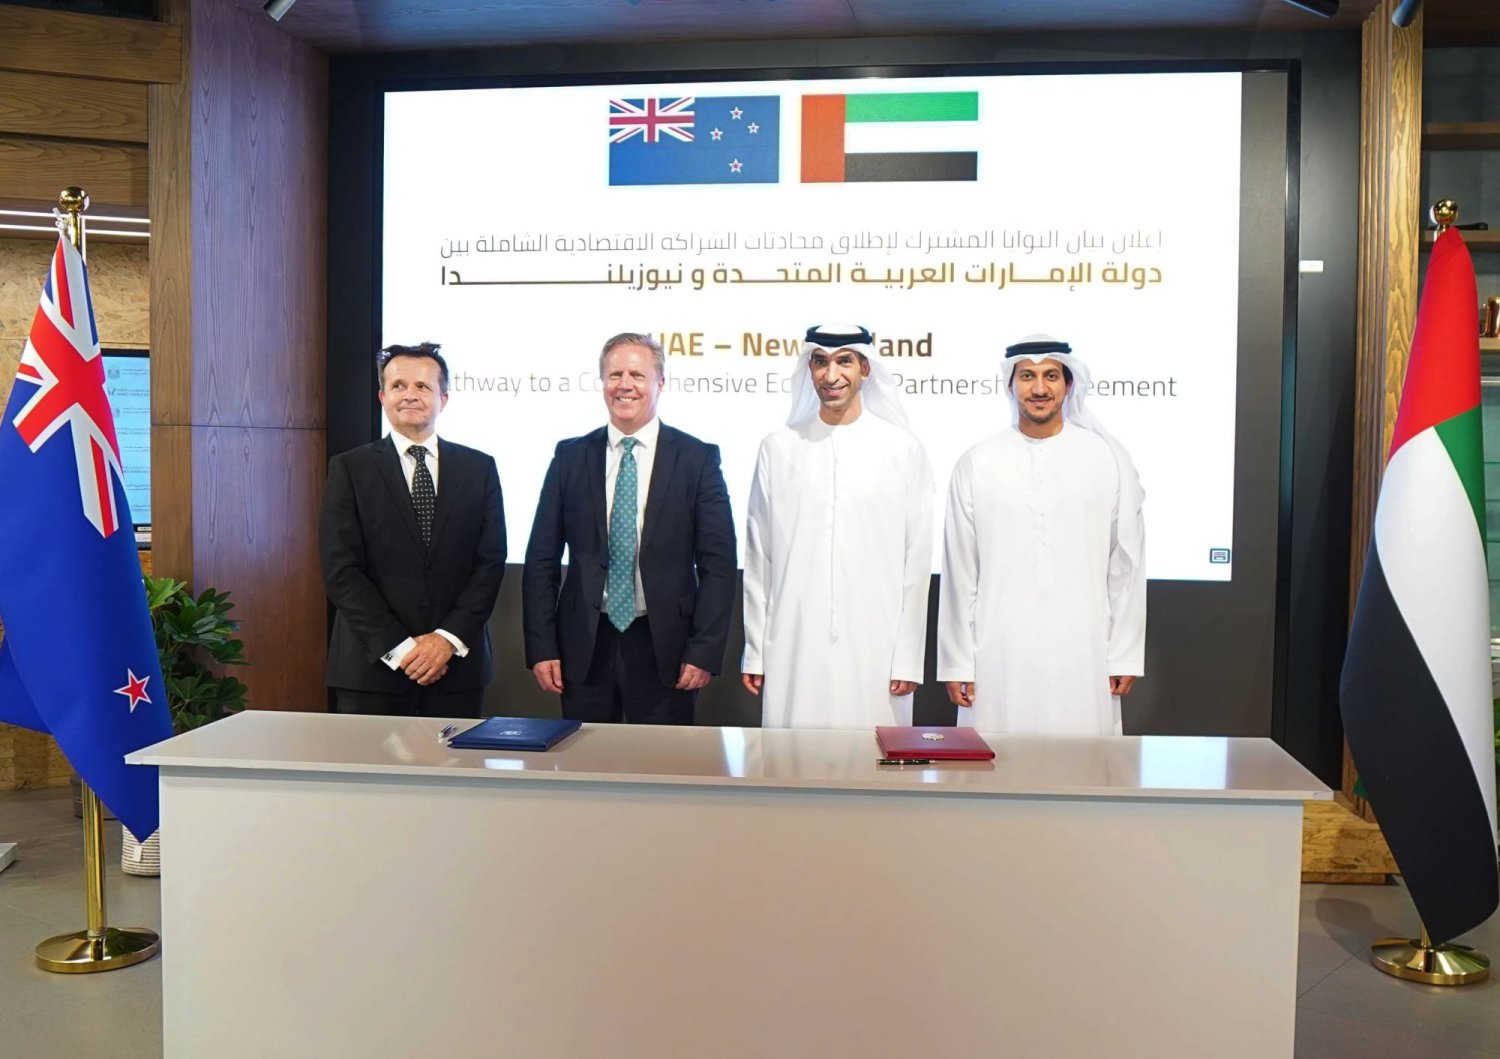 The United Arab Emirates and New Zealand will begin negotiations over a free trade agreement. WAM